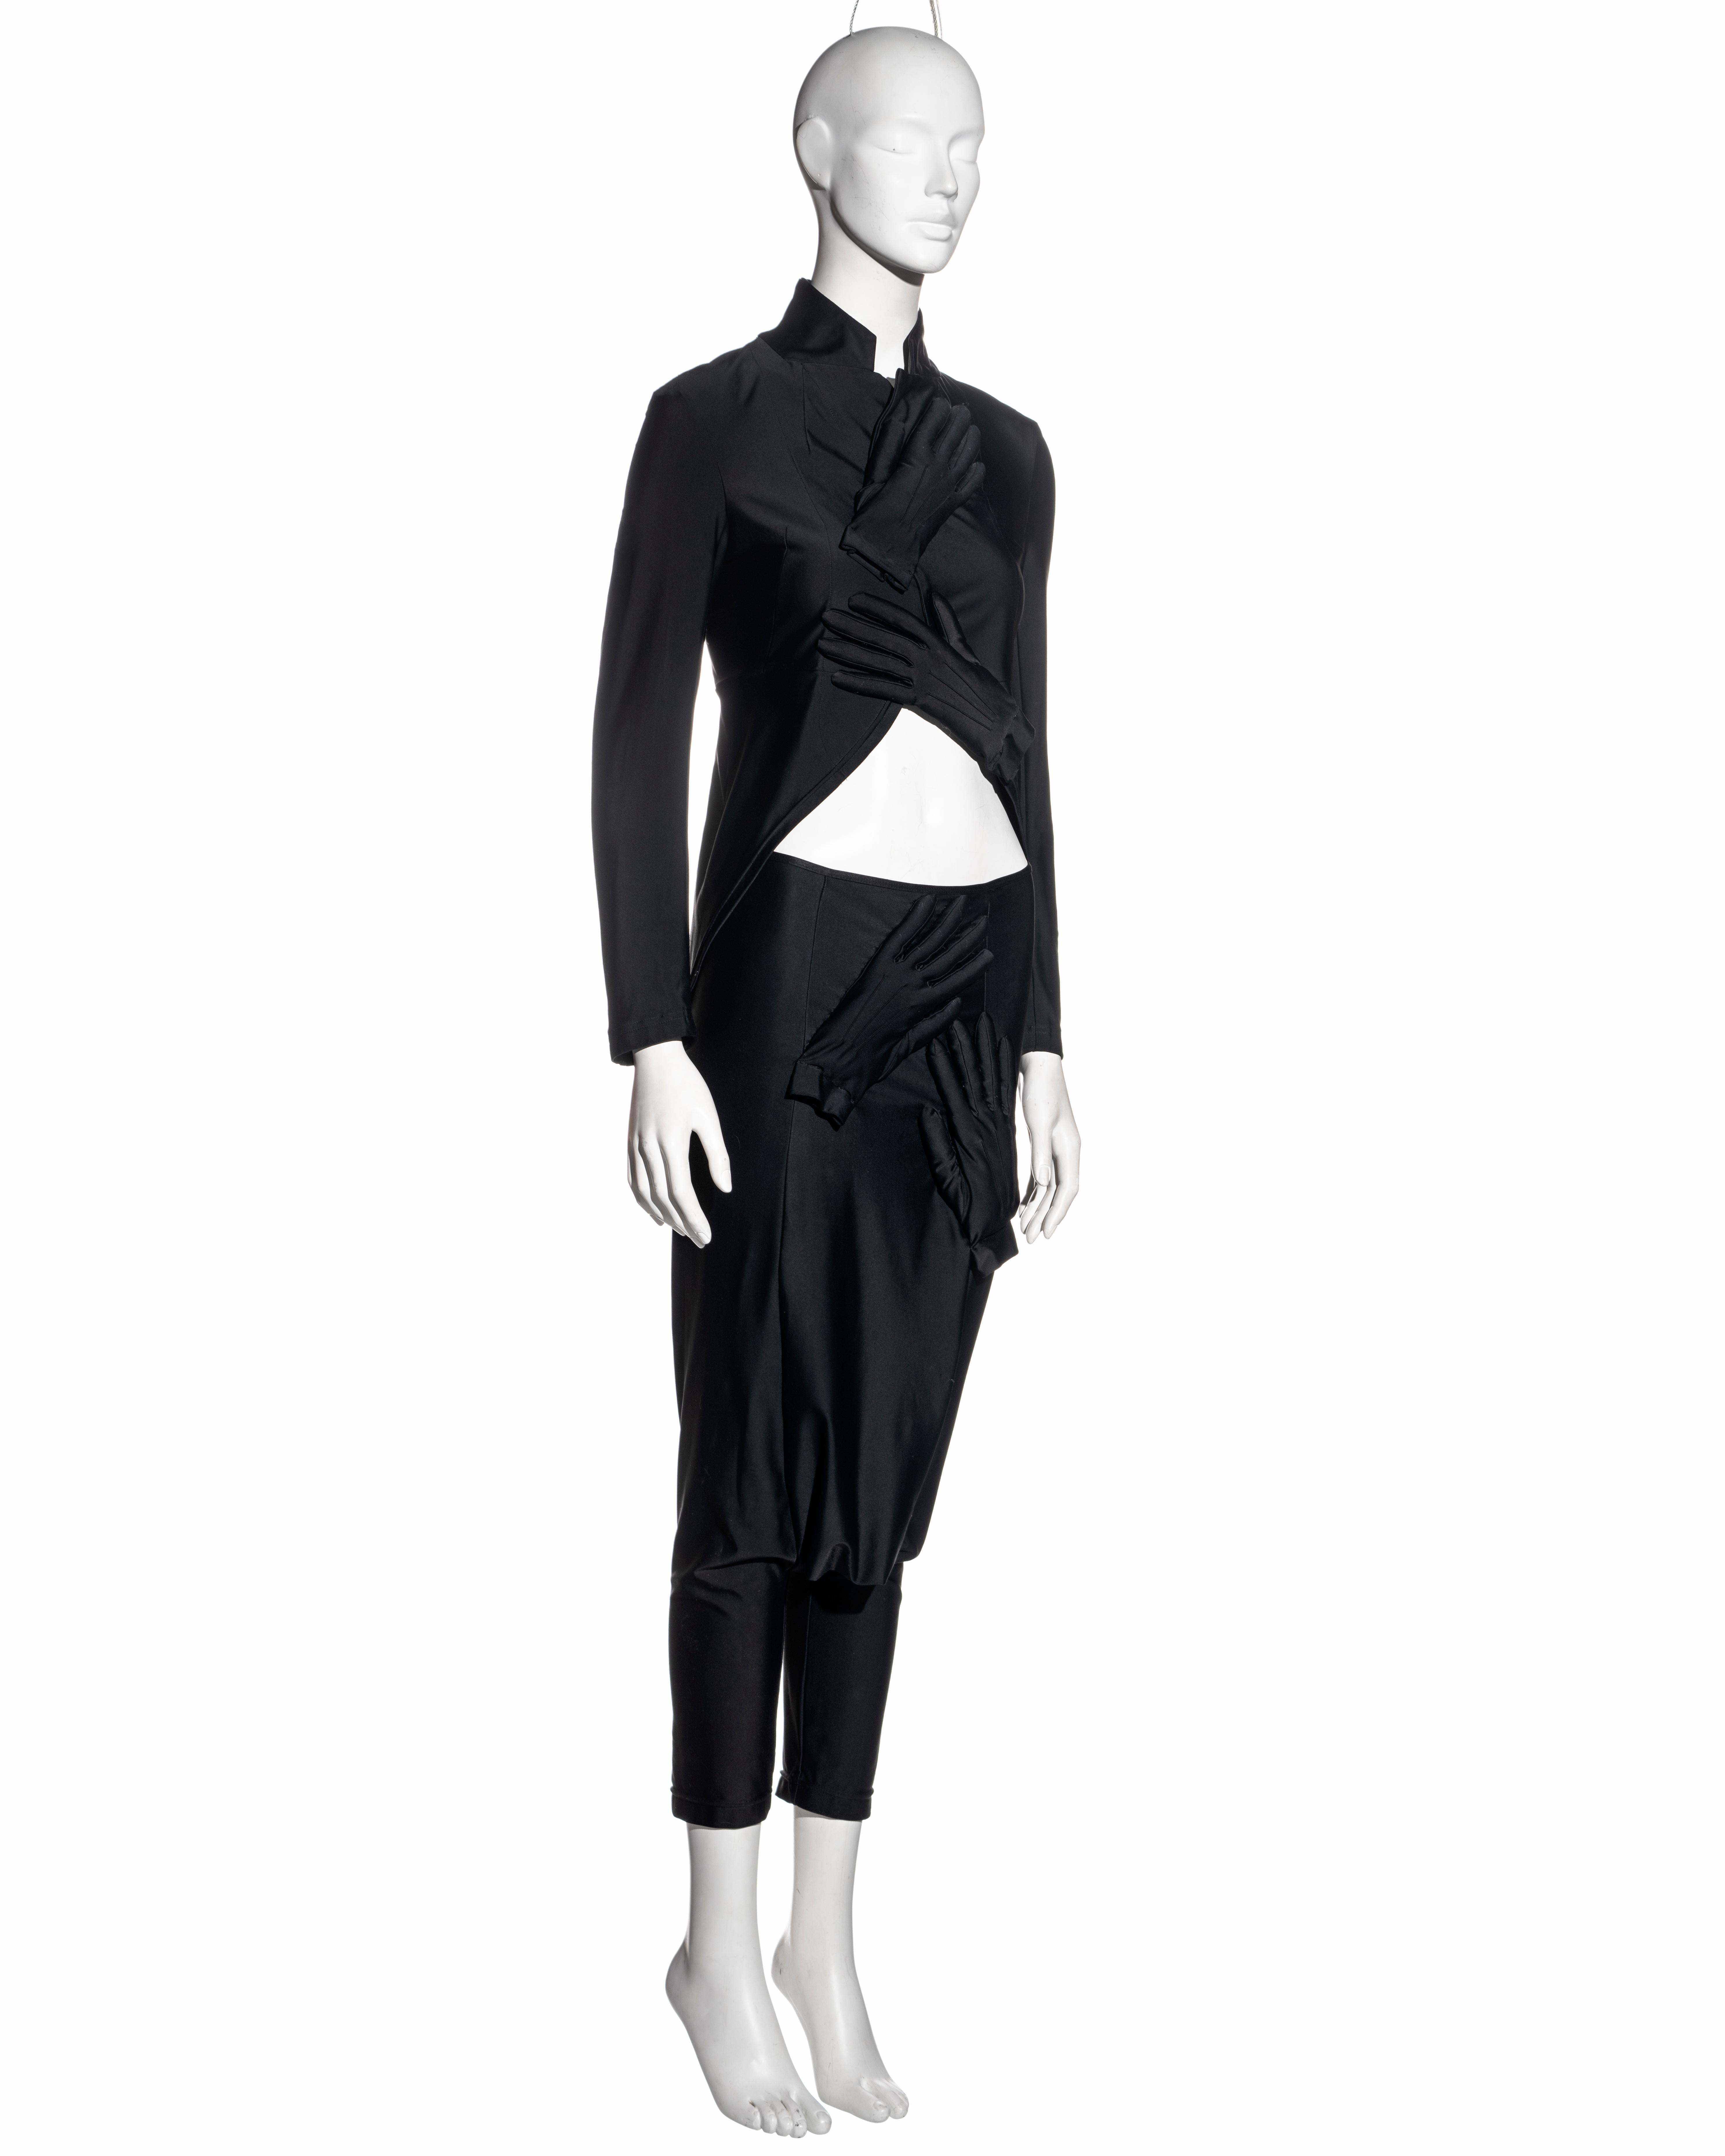 Women's Comme des Garçons black lycra jacket and pants with padded hand motifs, fw 2007